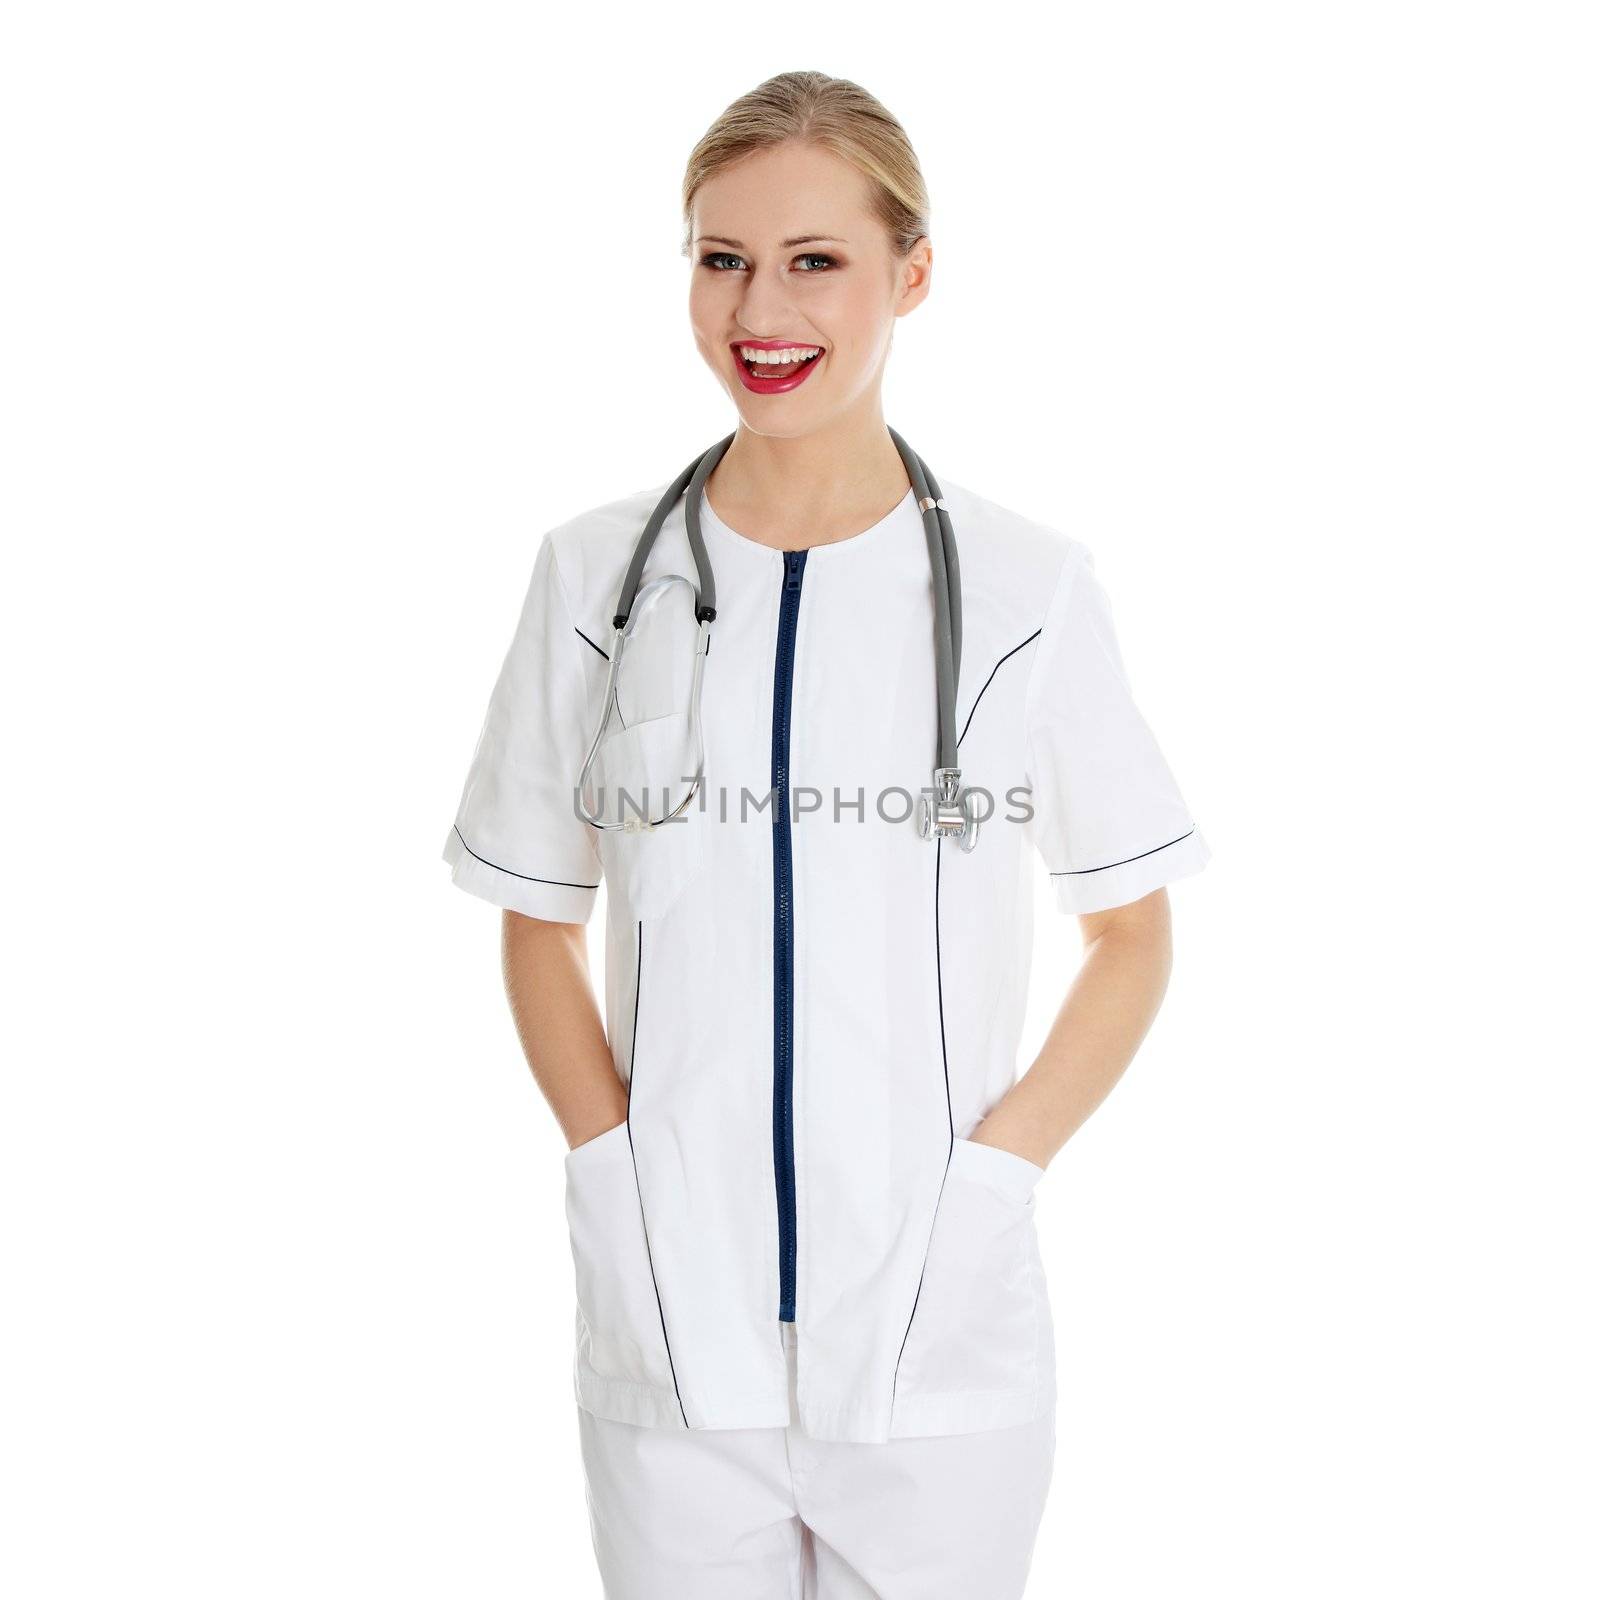 Female doctor or nurse by BDS